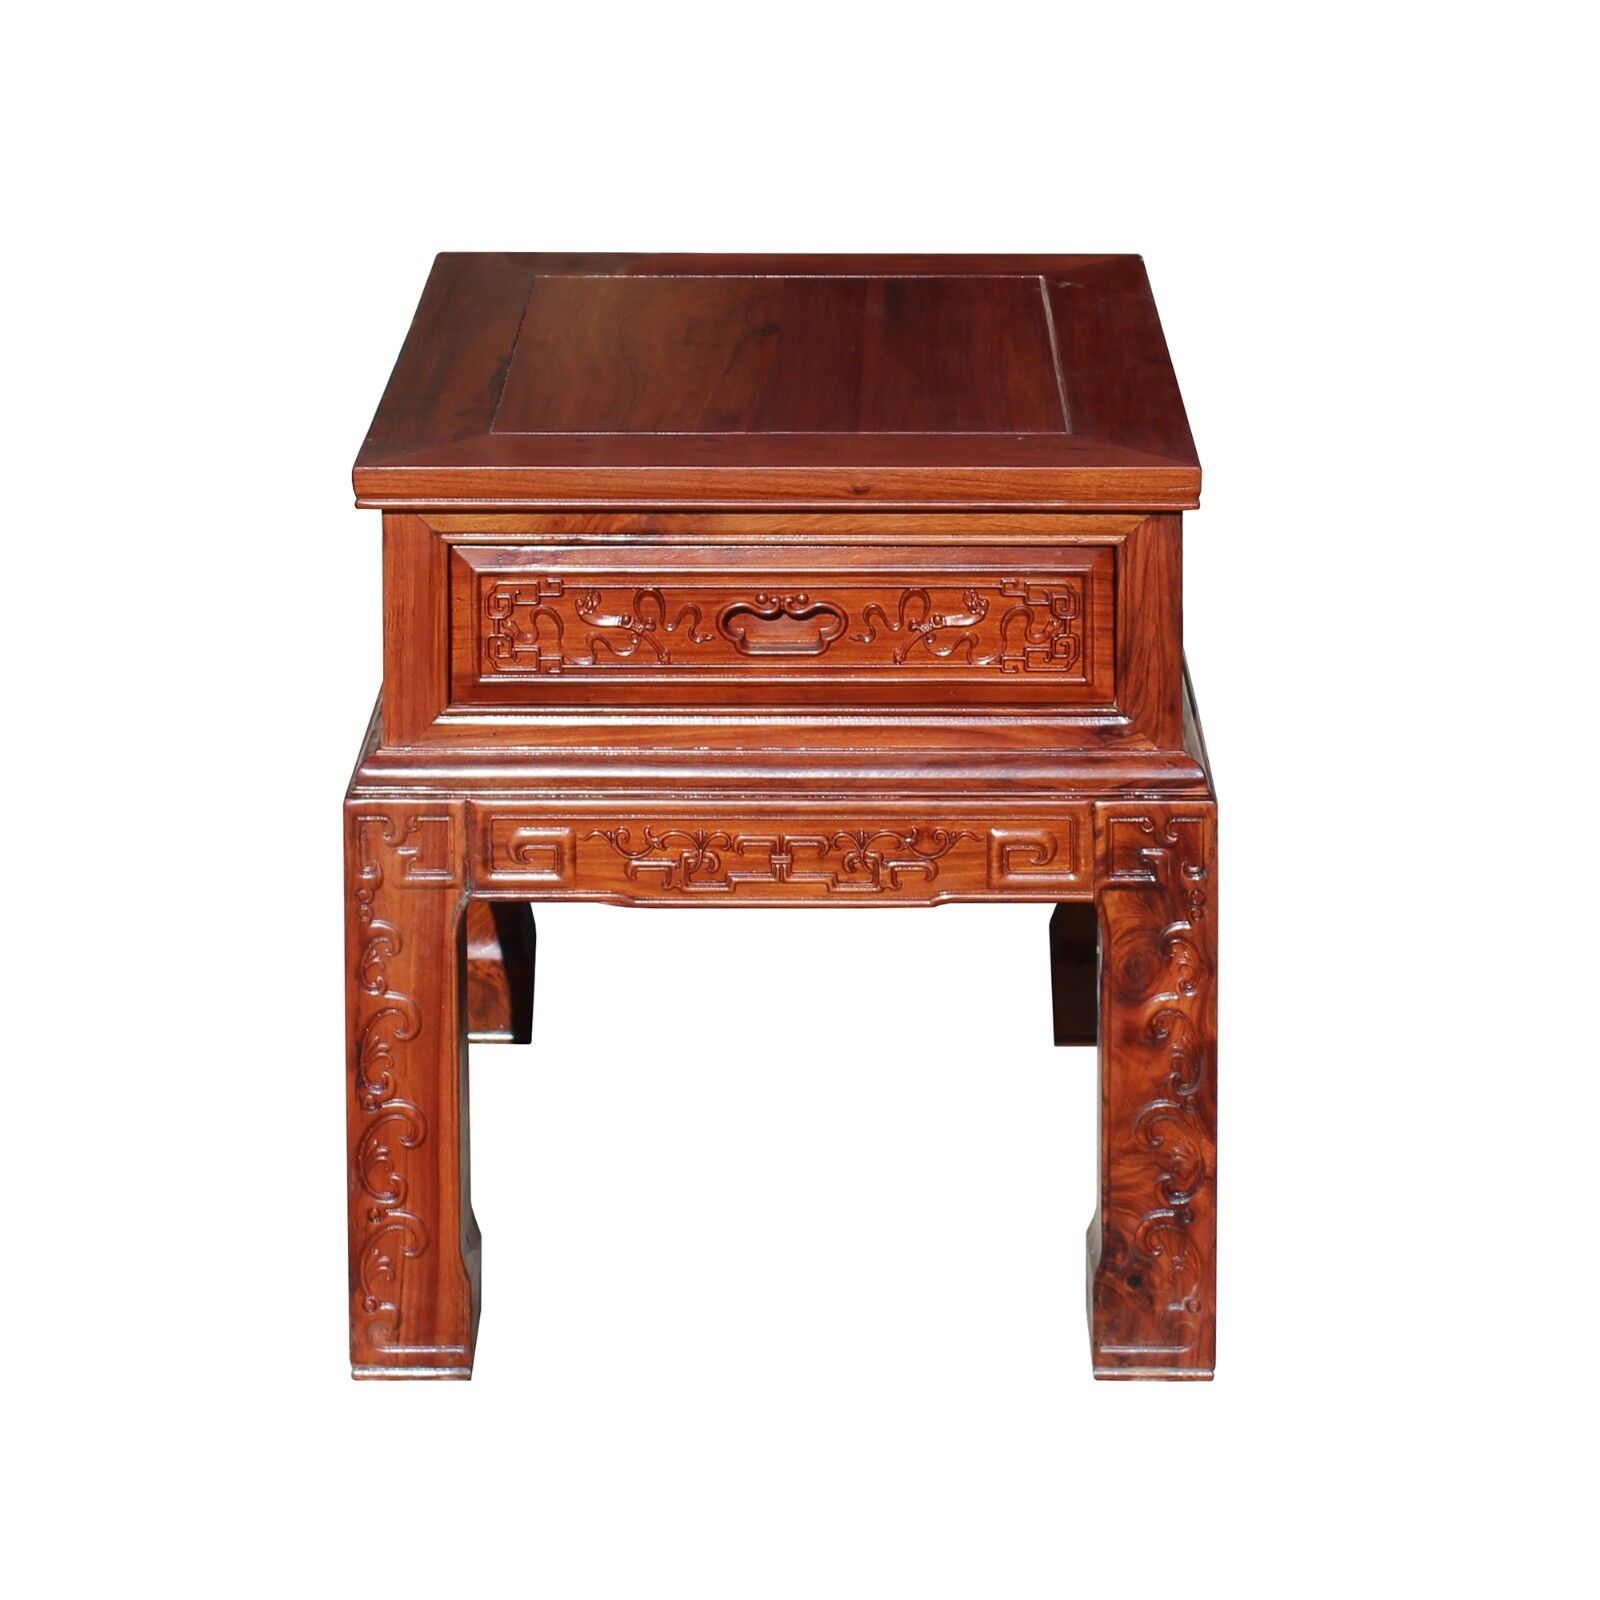 Chinese Oriental Huali Rosewood Flower Motif Tea Table Stand cs4594 Handmade Does Not Apply